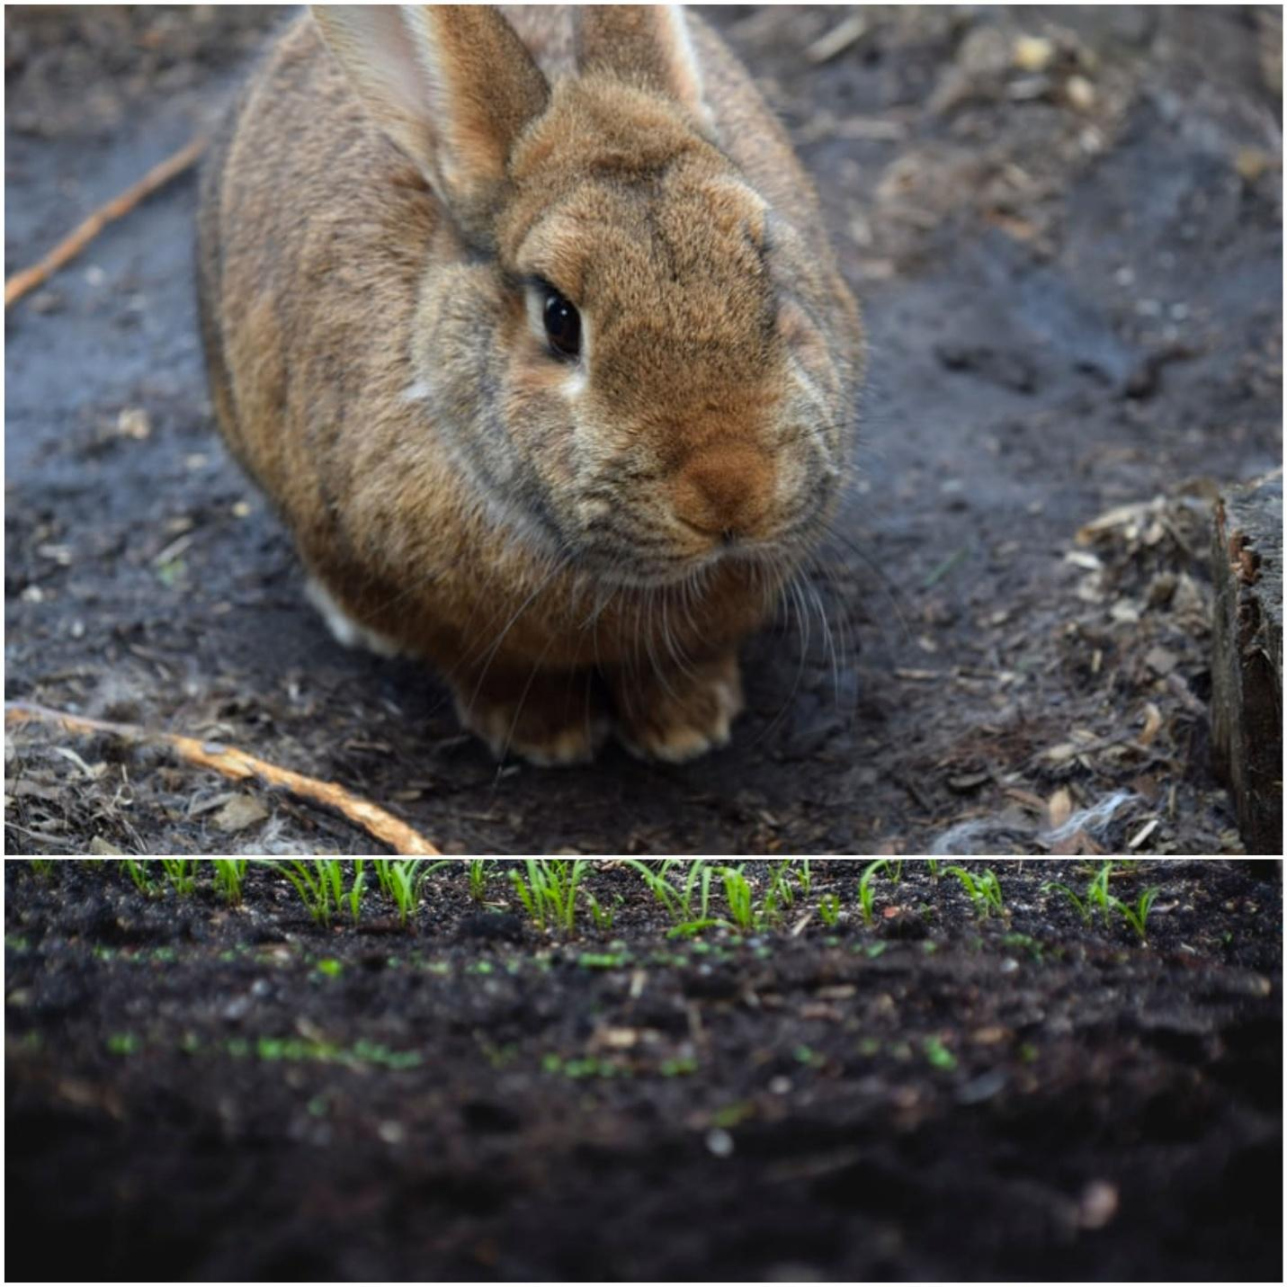 How Much Can You Sell Rabbit Manure For, And How To Sell It?